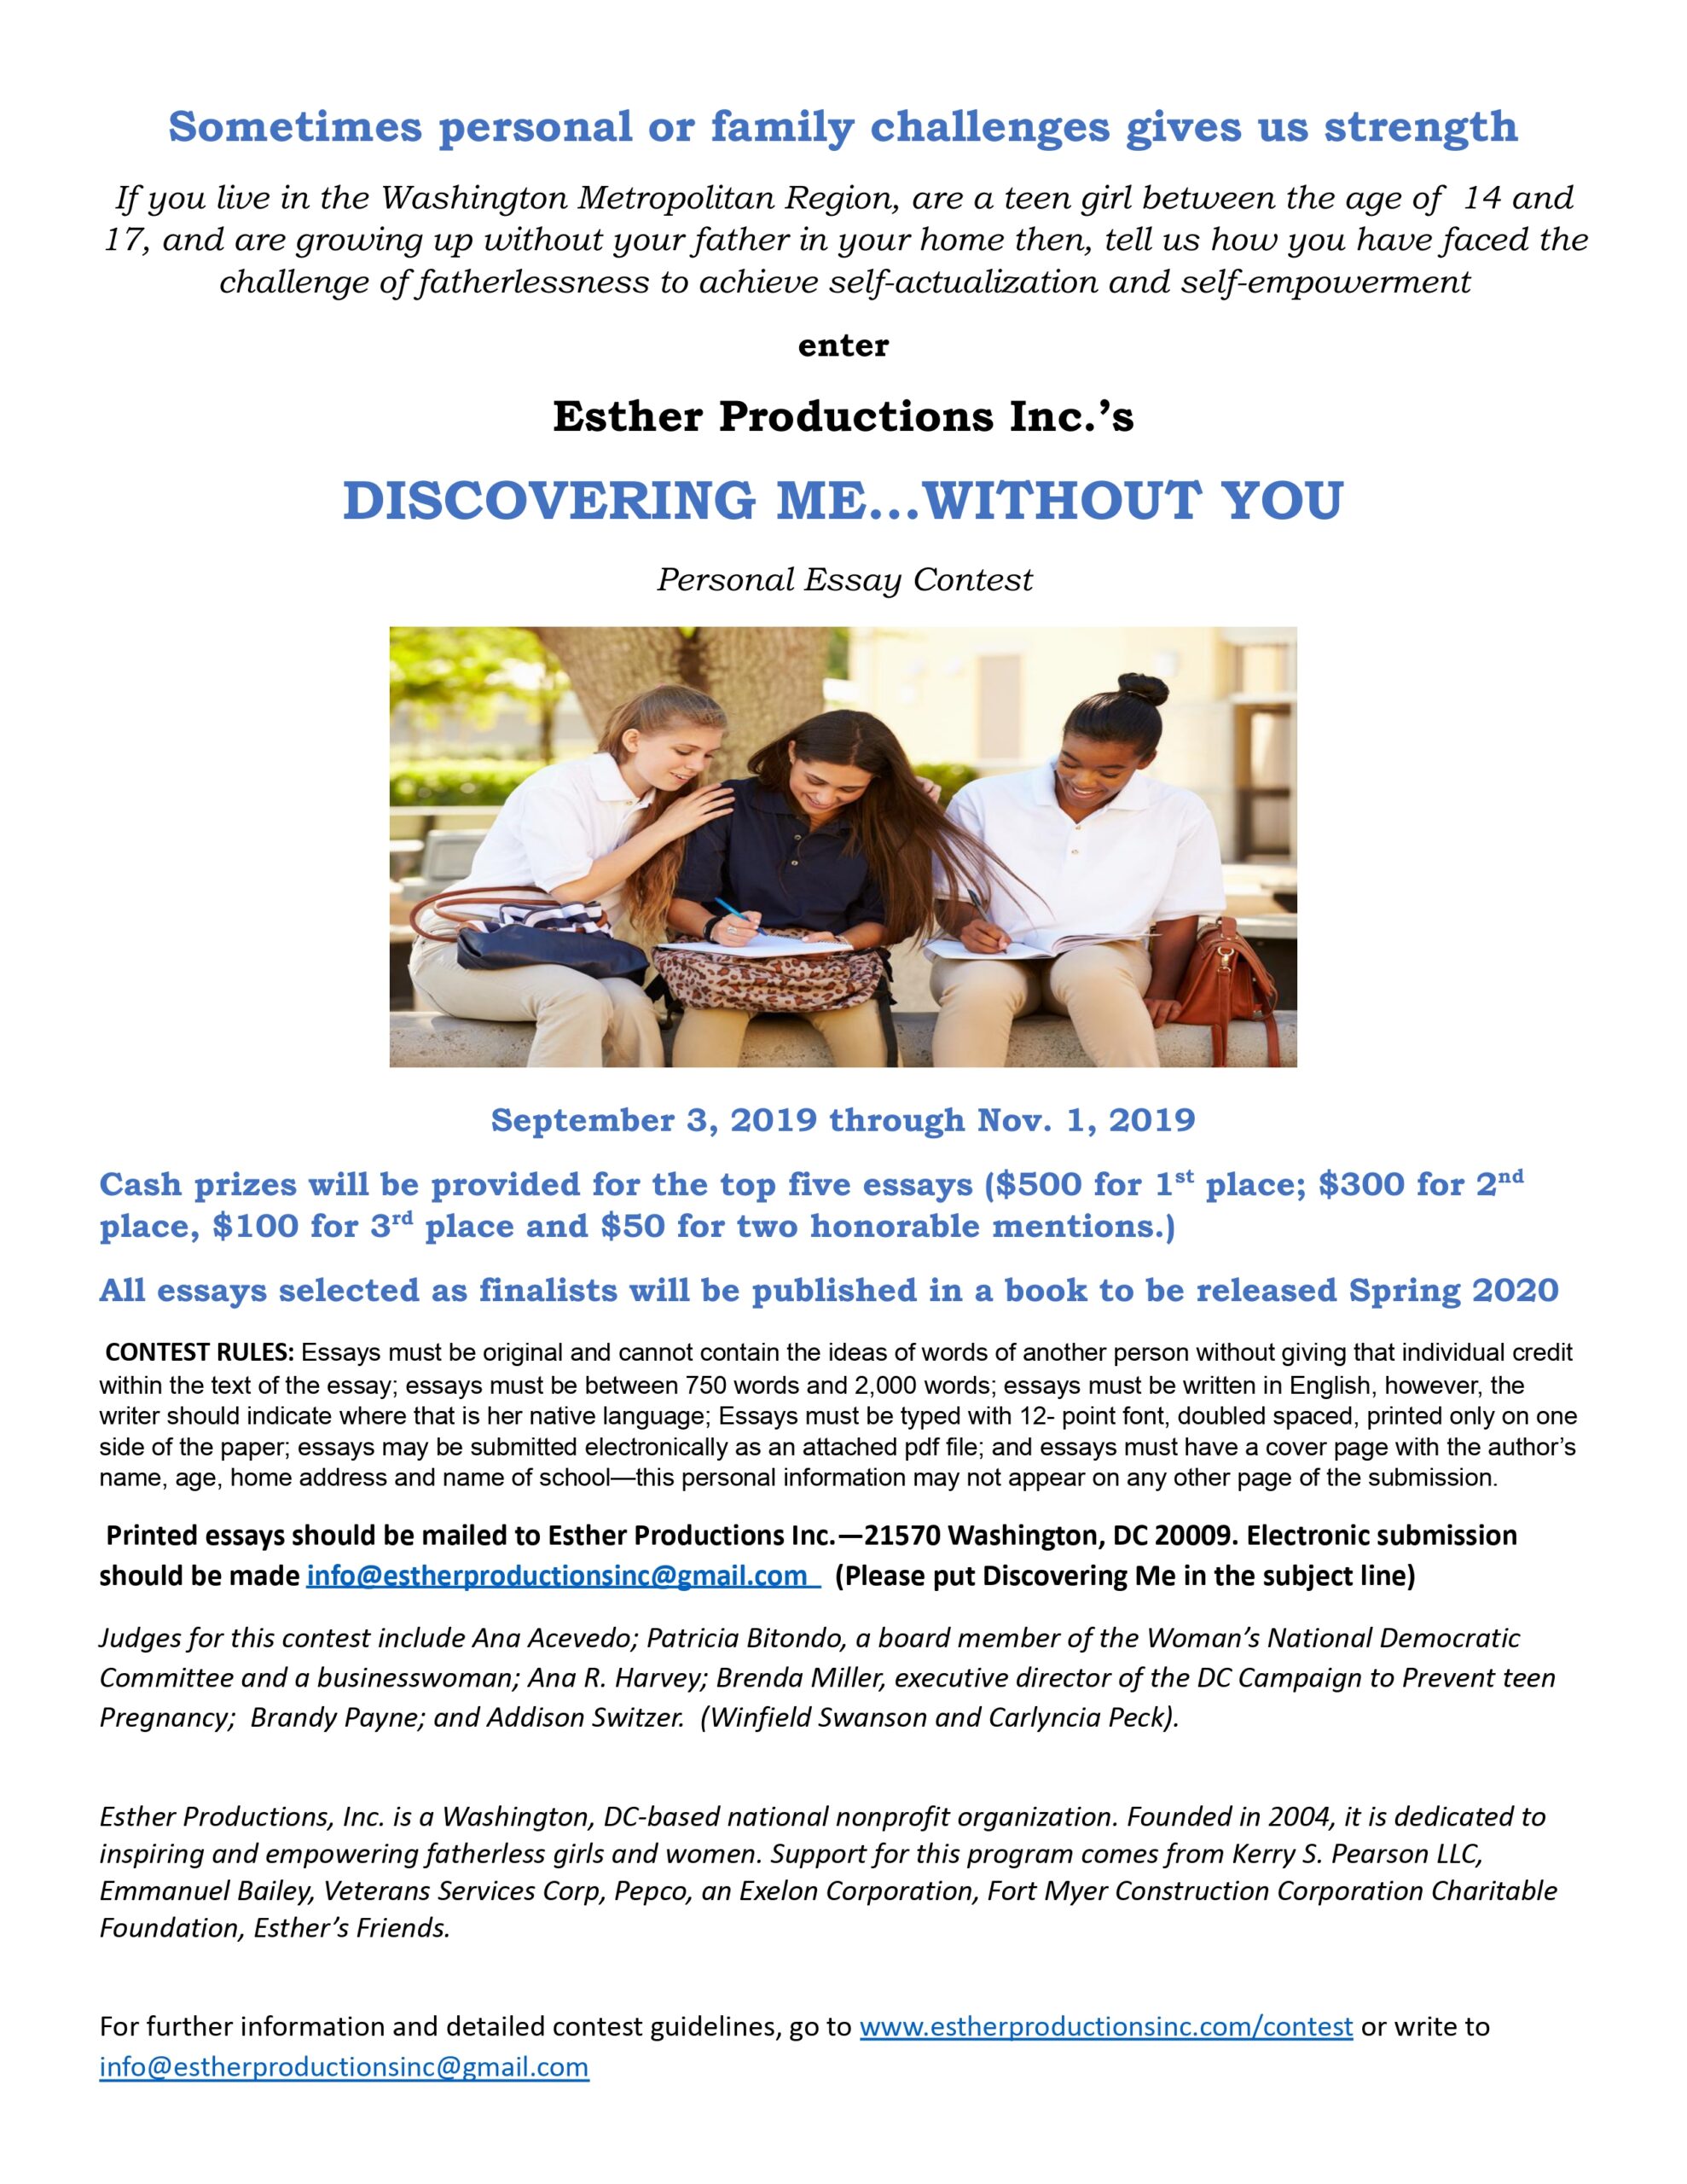 DiscoveringMe...WithoutYou Essay Contest2019.docx_page-0001 (1)